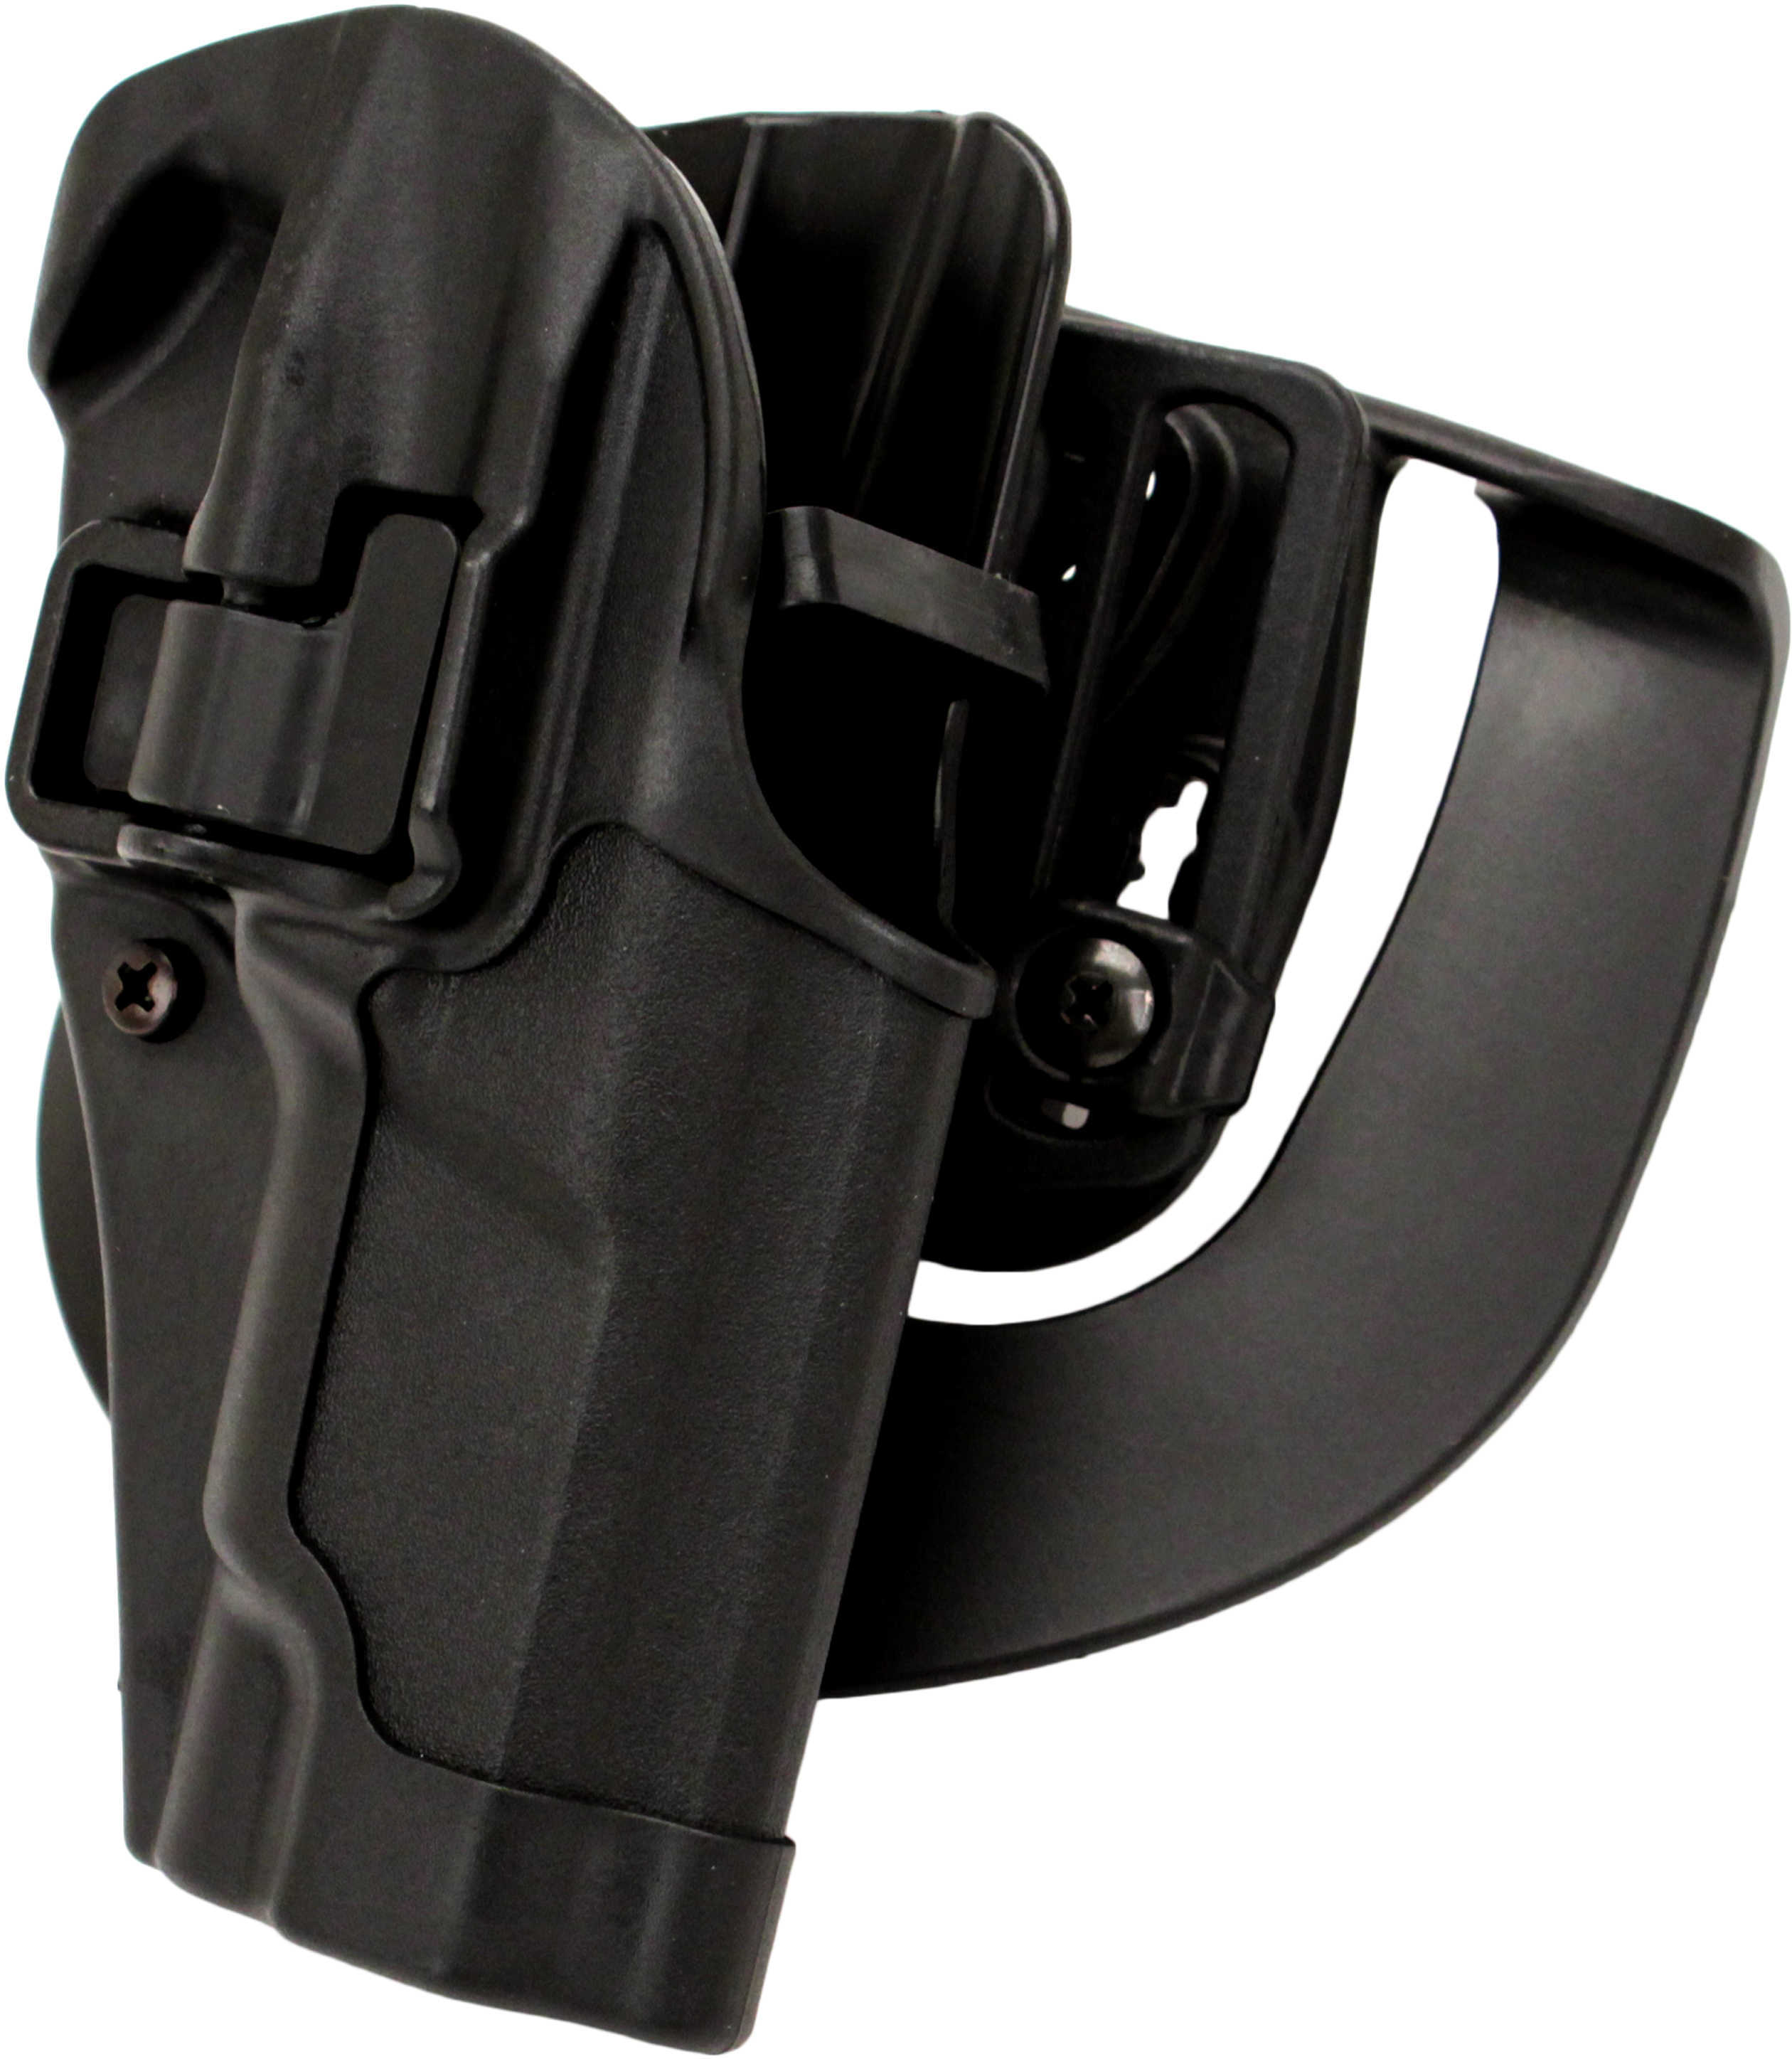 BLACKHAWK! CQC SERPA Holster With Belt and Paddle Attachment Fits Ruger® P85/89 Right Hand 410511BK-R